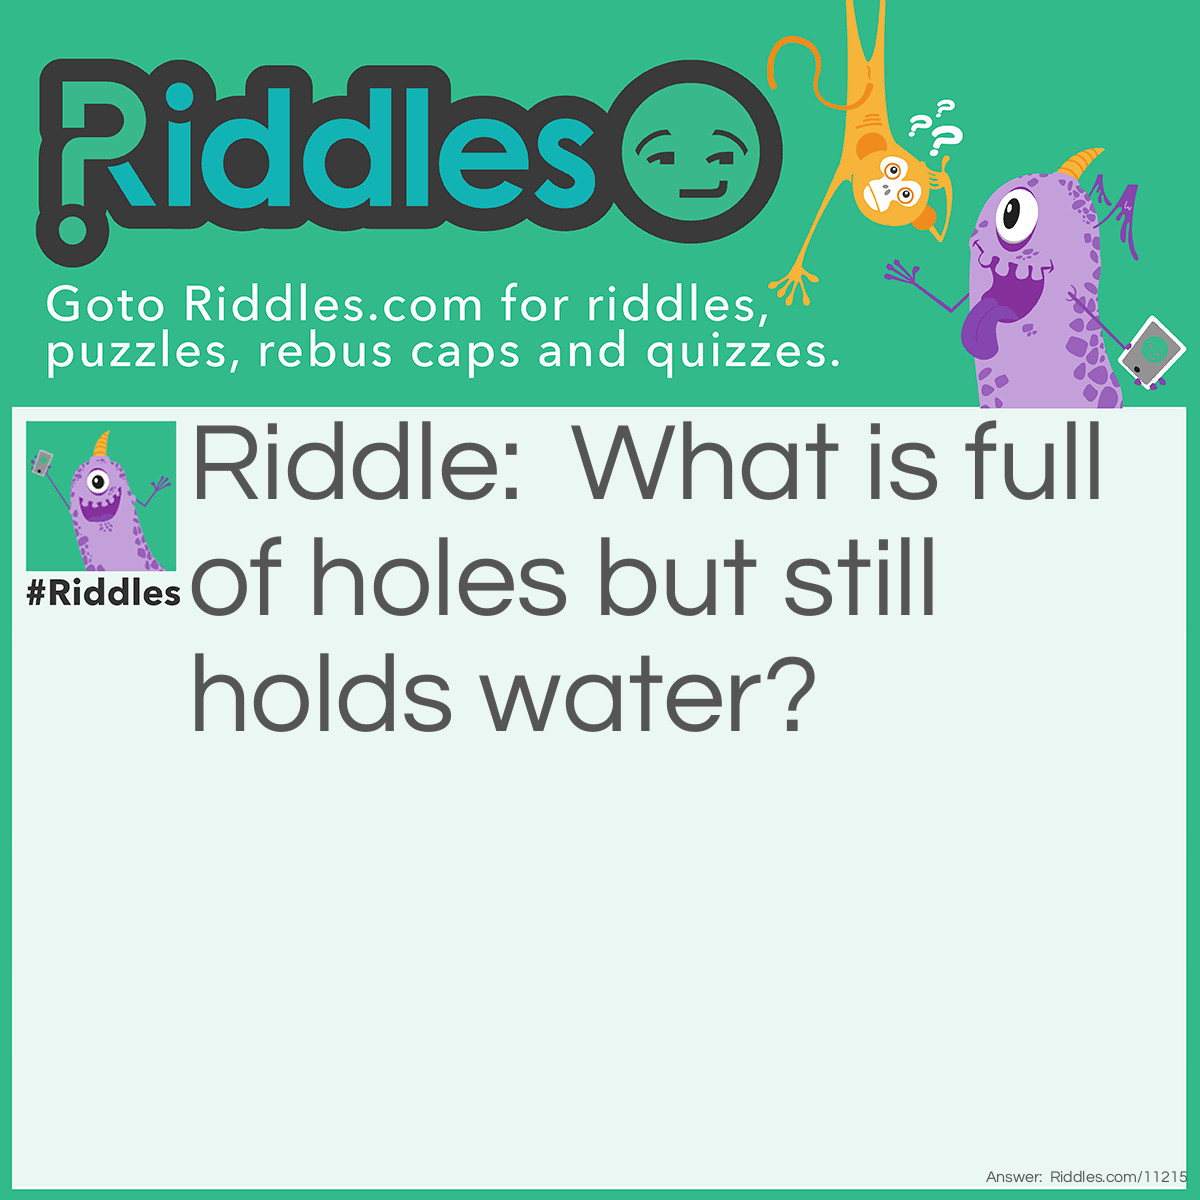 Riddle: What is full of holes but still holds water? Answer: A sponge